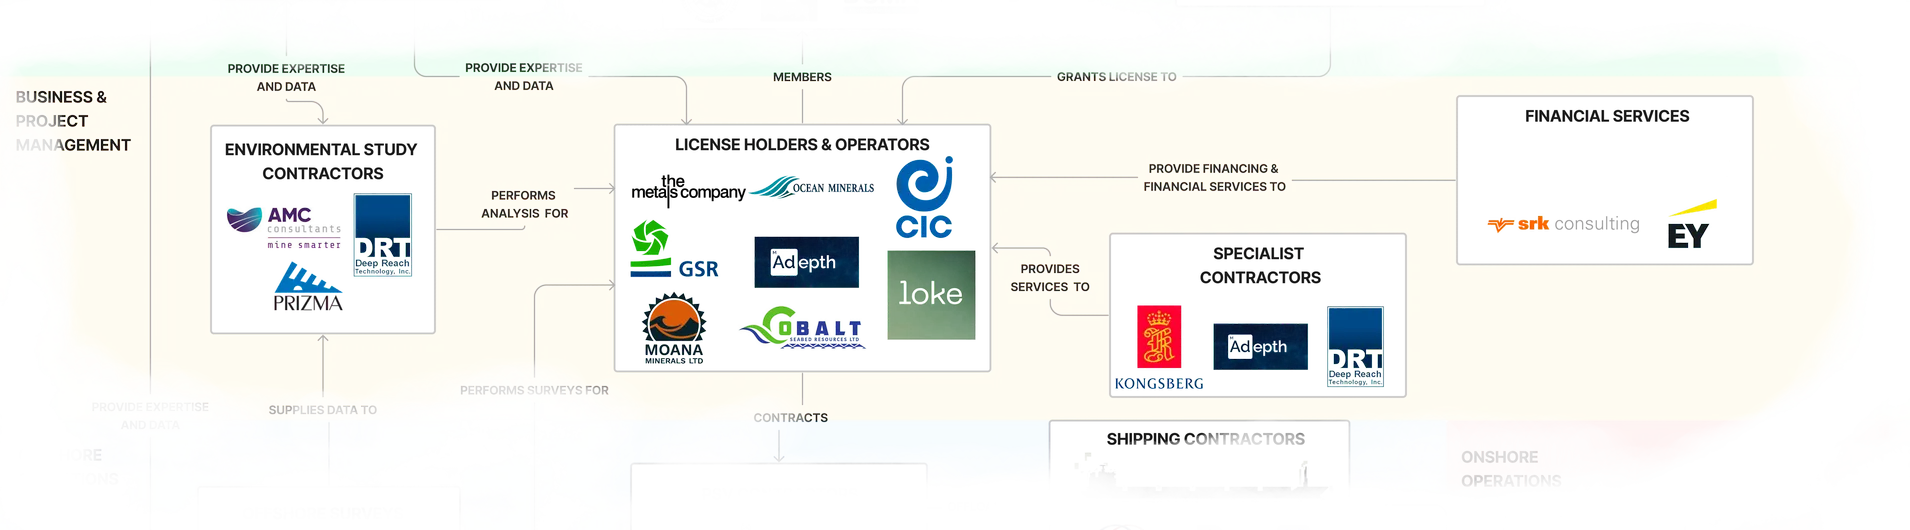 Business ecosystem diagram of the business part of the subsea and deep sea mining industry 